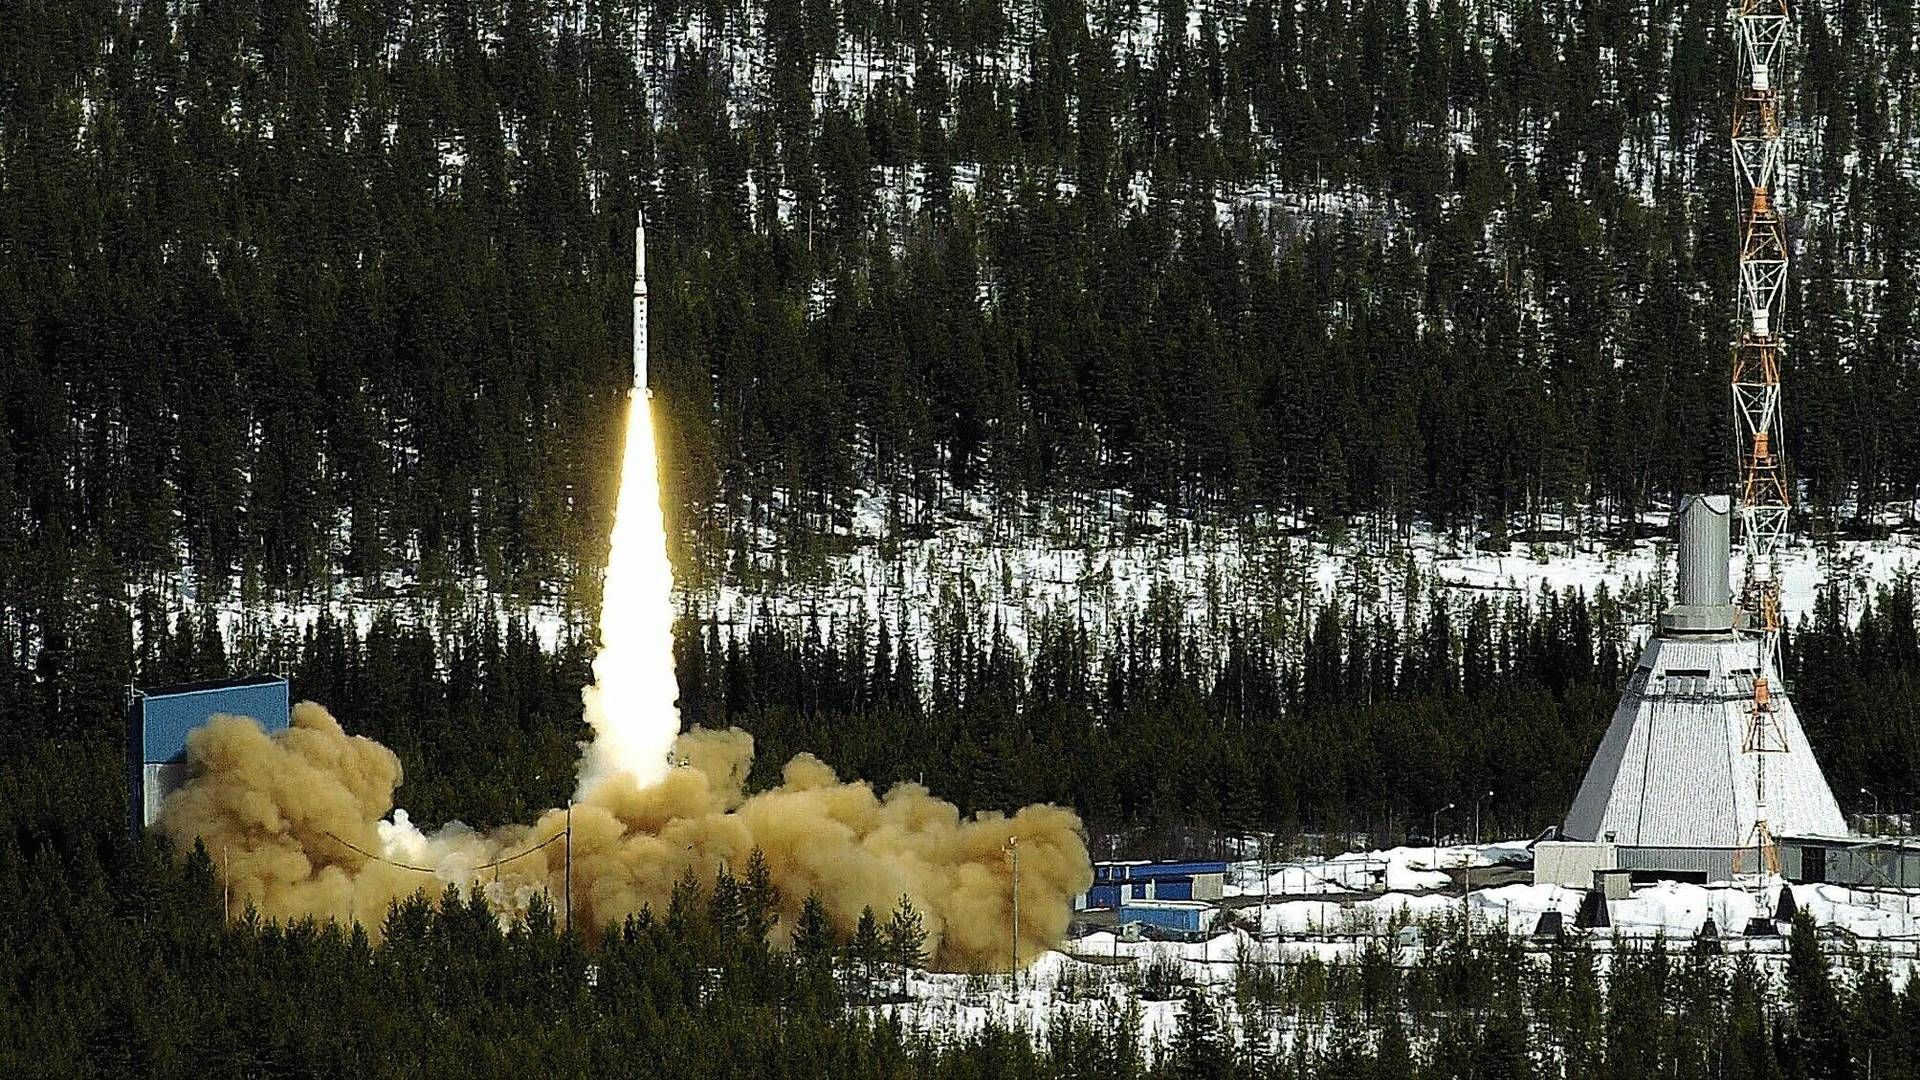 Rocket science – Swedish researchers have earned a spot on Suborbital Express 3, which will launch from Esrange Space Center in Kiruna | Photo: Roland S. Lundstrøm / NTB SCANPIX